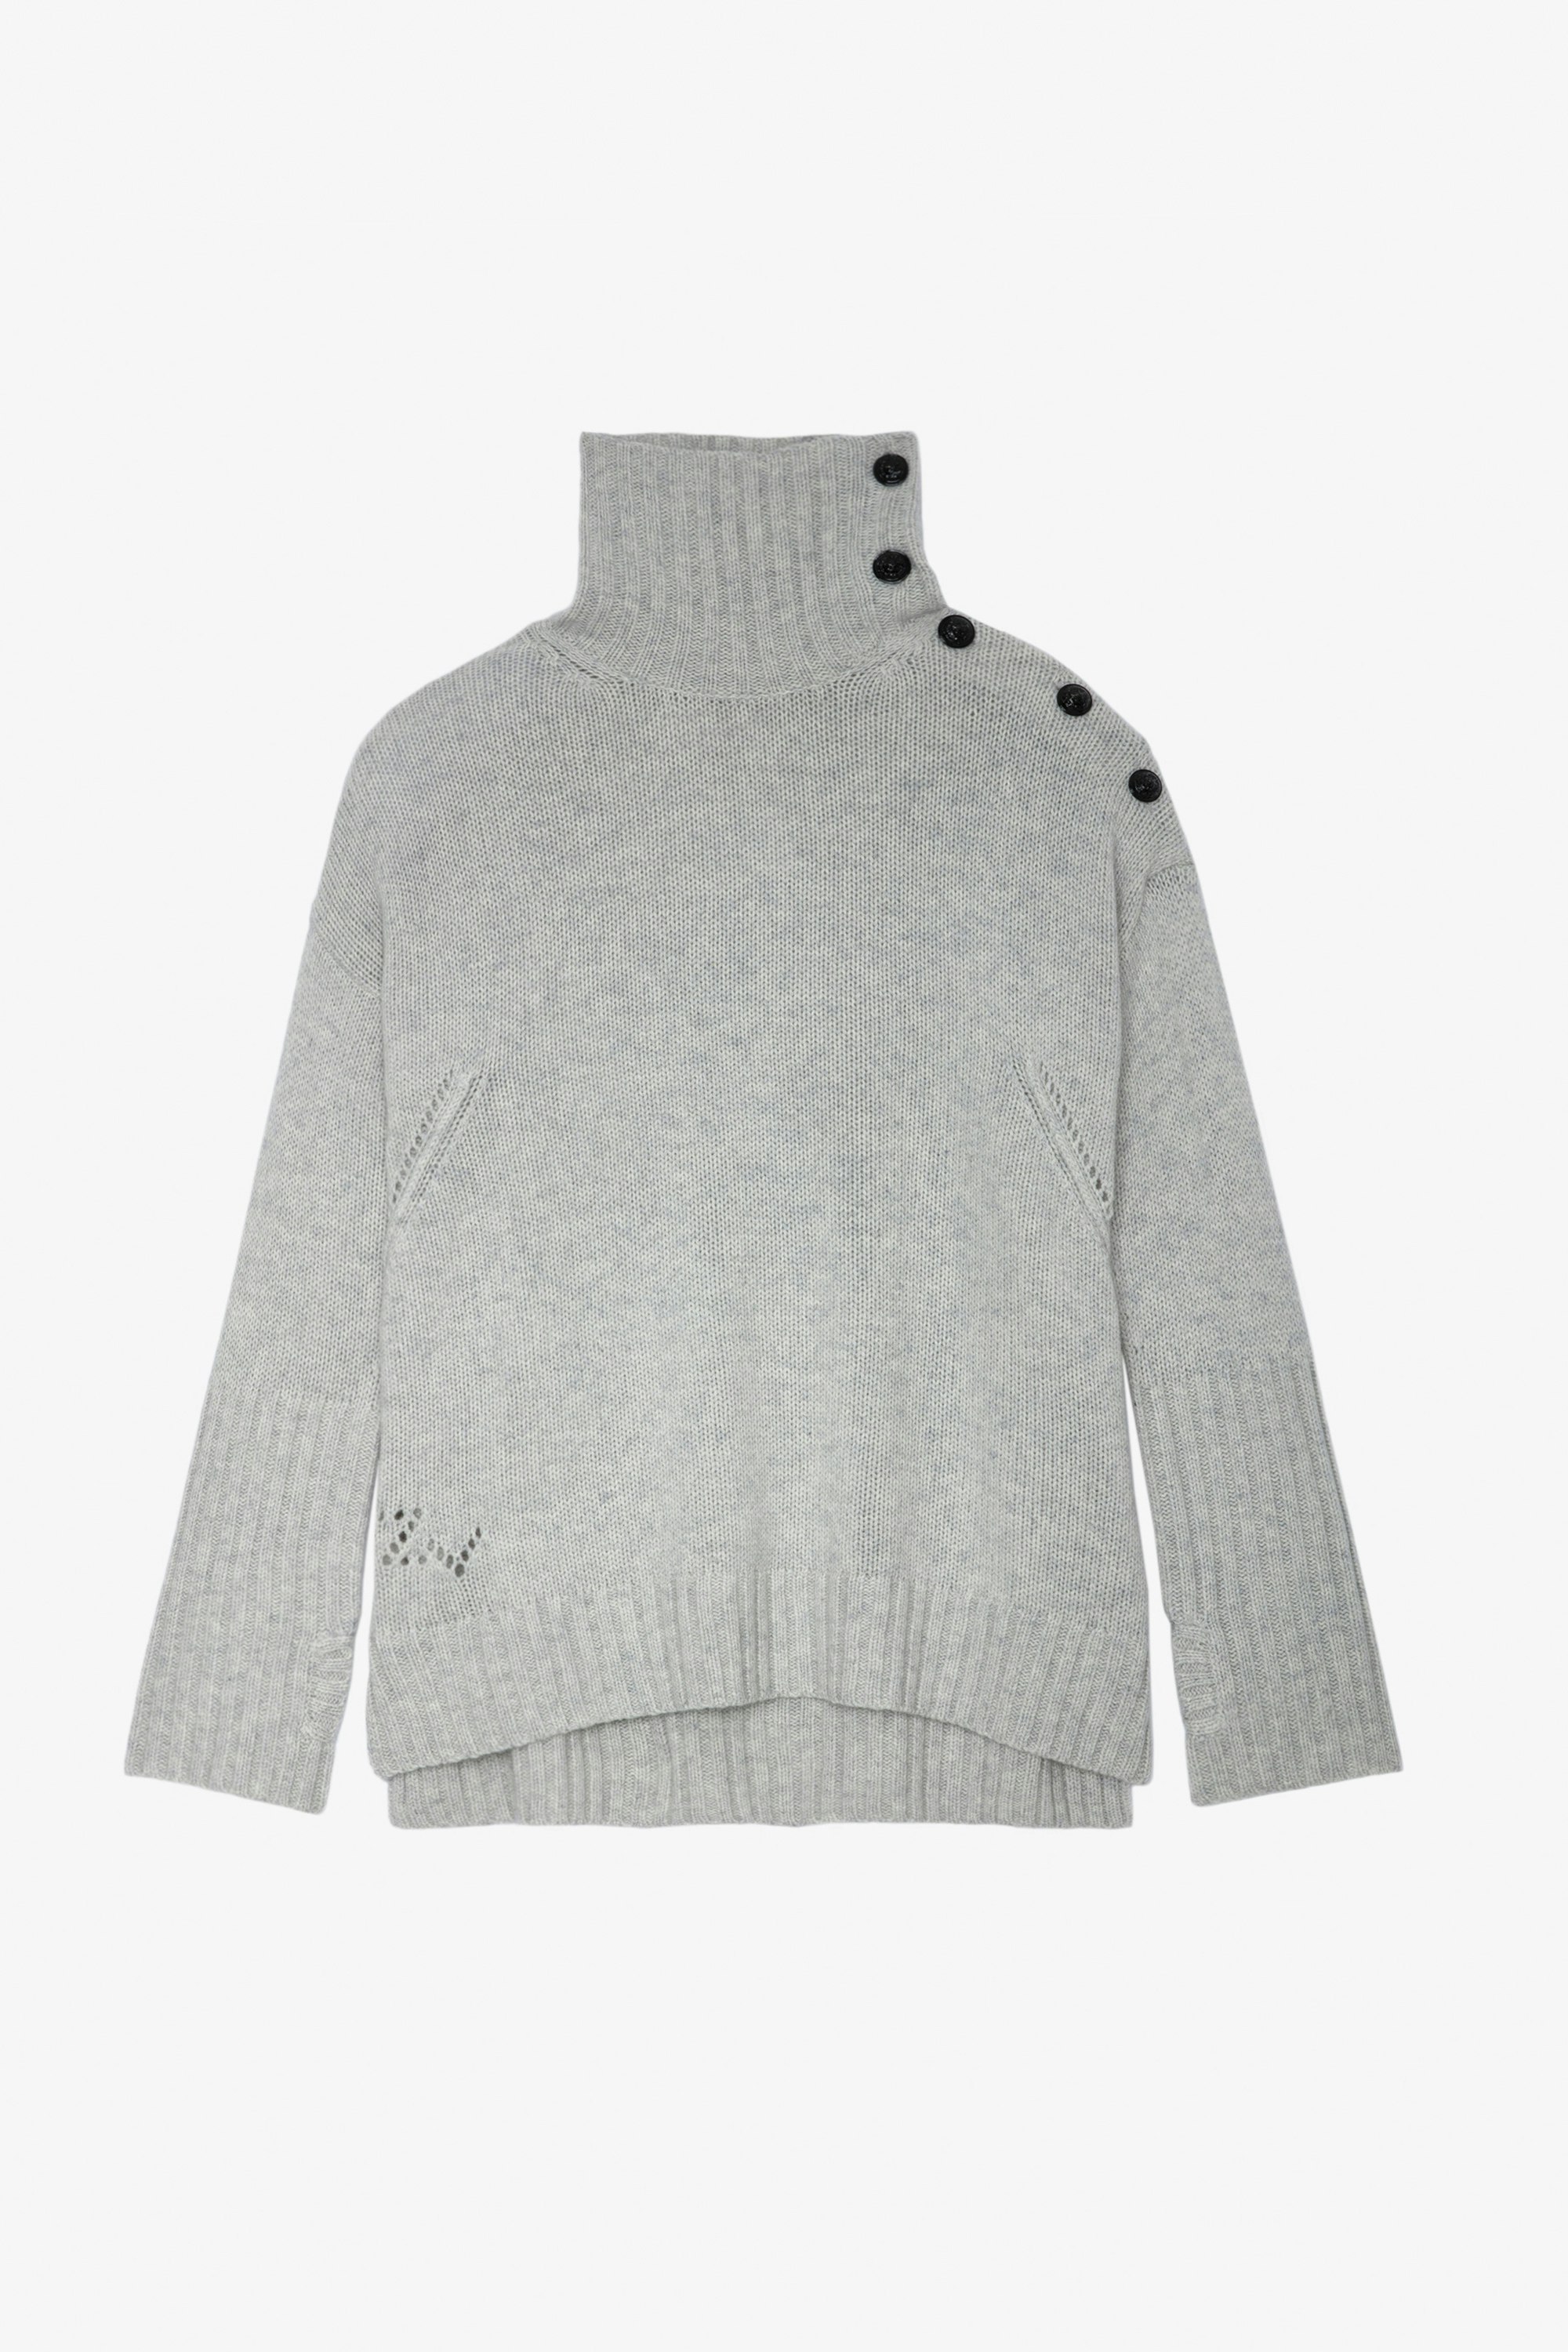 Alma カシミヤニット - Women’s ecru cashmere jumper with mock neckline and buttons on the shoulders